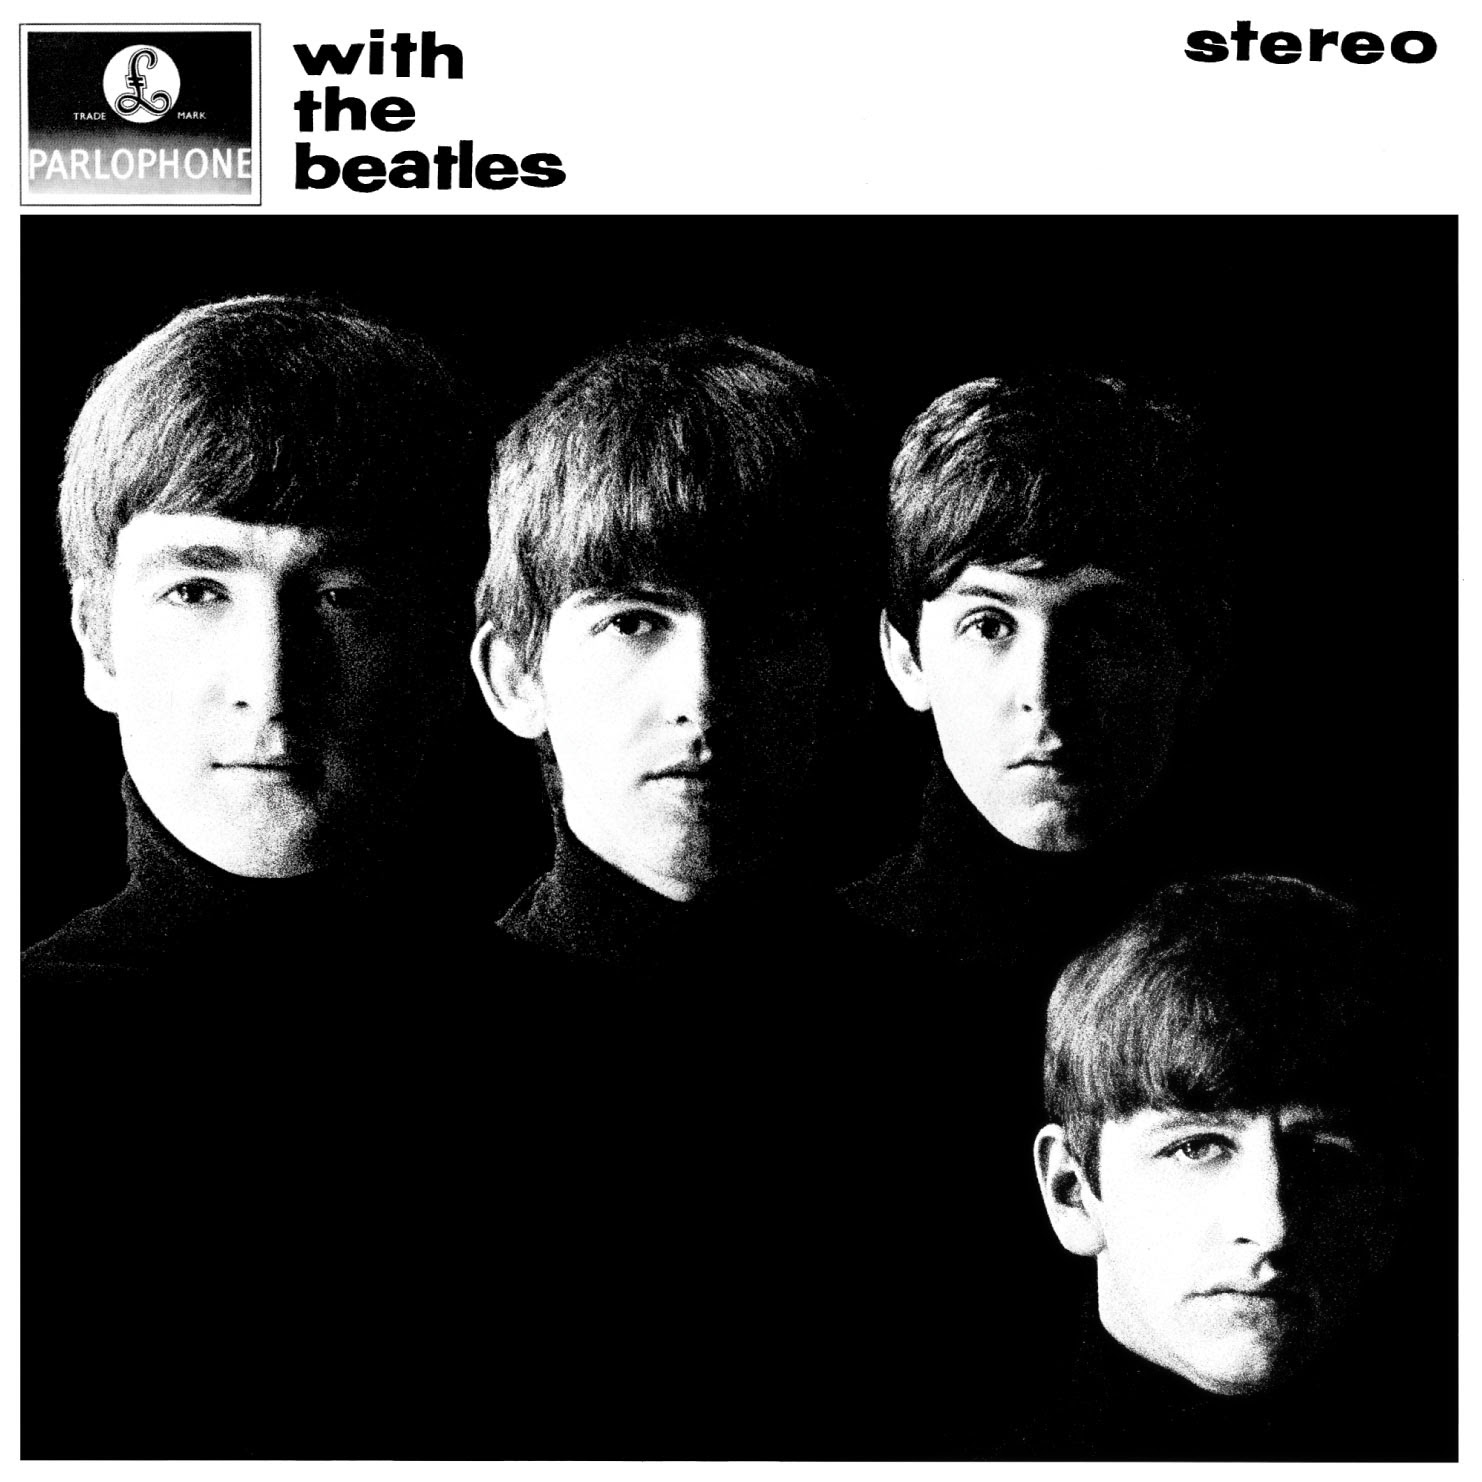 "With The Beatles" by The Beatles album cover. Members of the band in black and white headshots against a black background